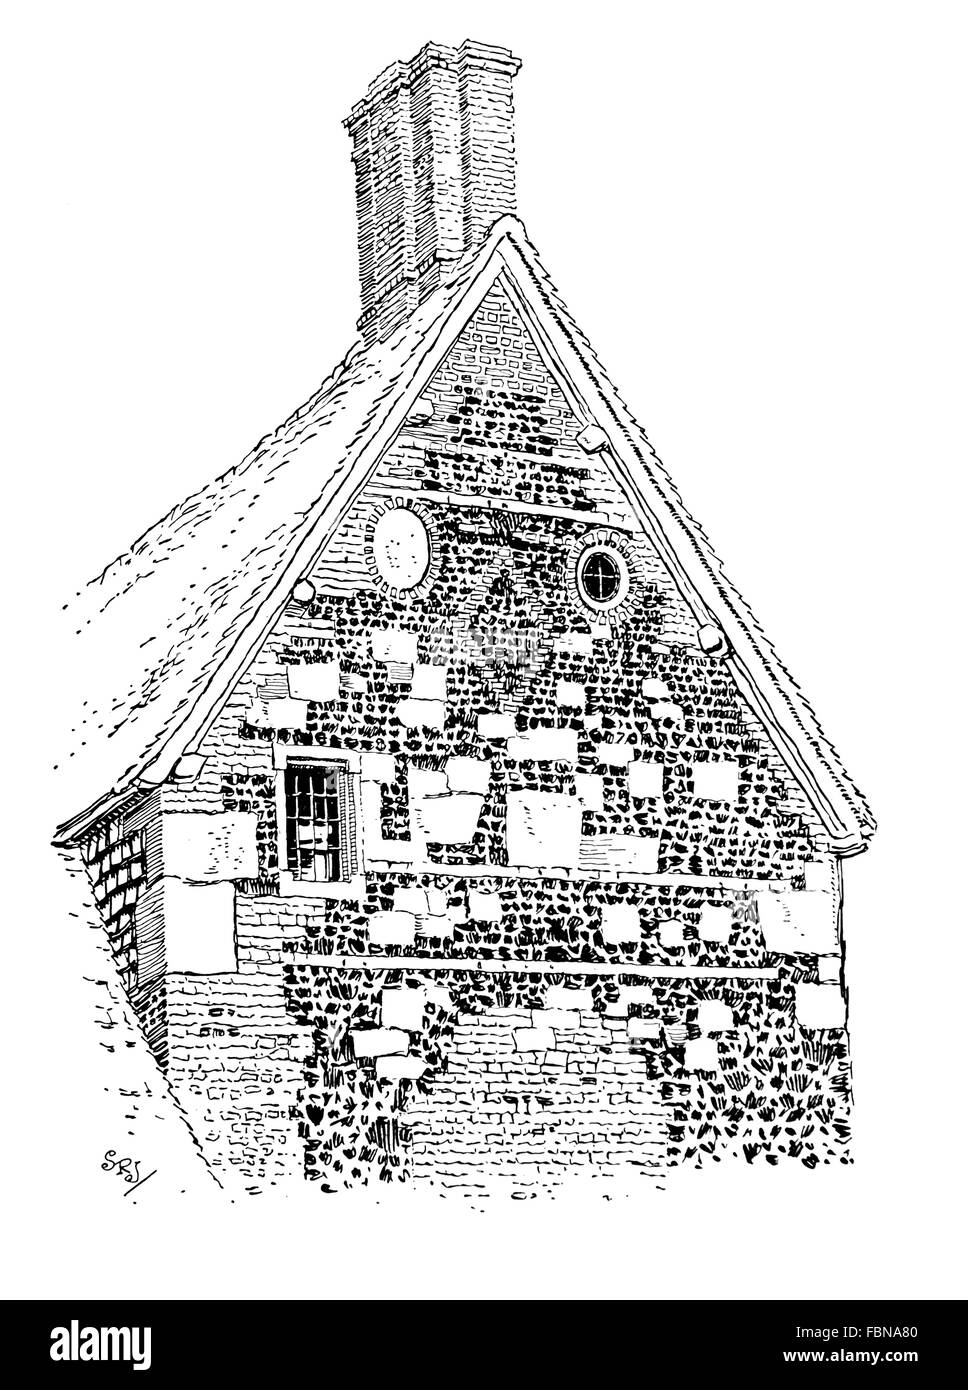 UK, England, Wiltshire, Winterbourne Ford old brick and fline gable end and chimneys 1911 line illustration by Sydney R Jones Stock Photo